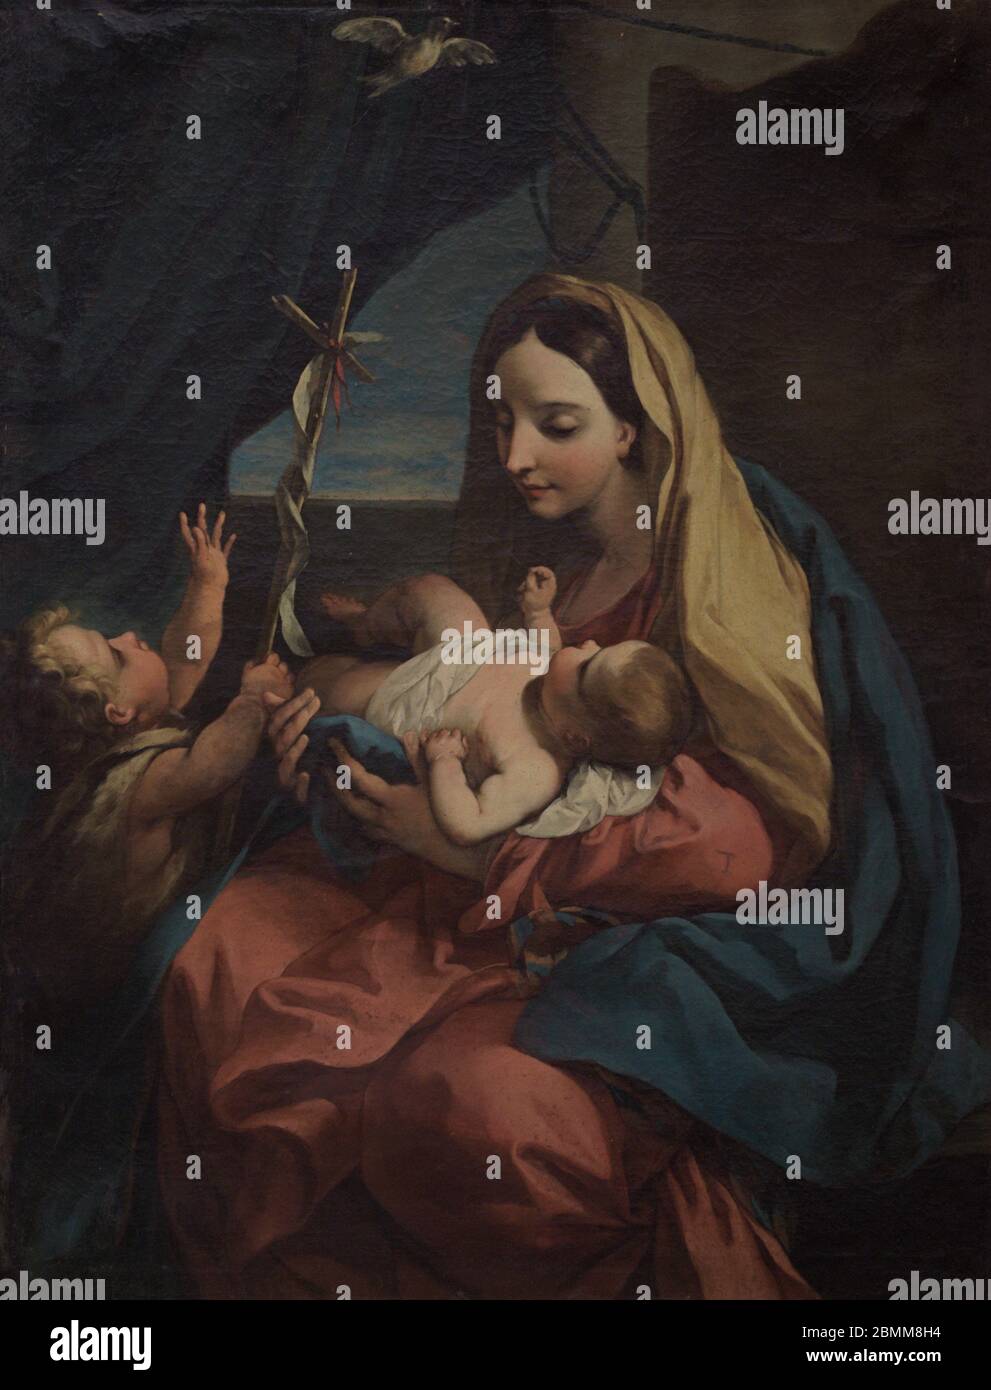 Carlo Maratta (1625-1713). Italian Baroque painter. Madonna and Child with infant Saint John. Oil on canvas. The seated Madonna holds Baby Jesus in her arms, with the infant Saint John the Baptist nearby. National Museum of Fine Arts. Valletta. Malta. Stock Photo